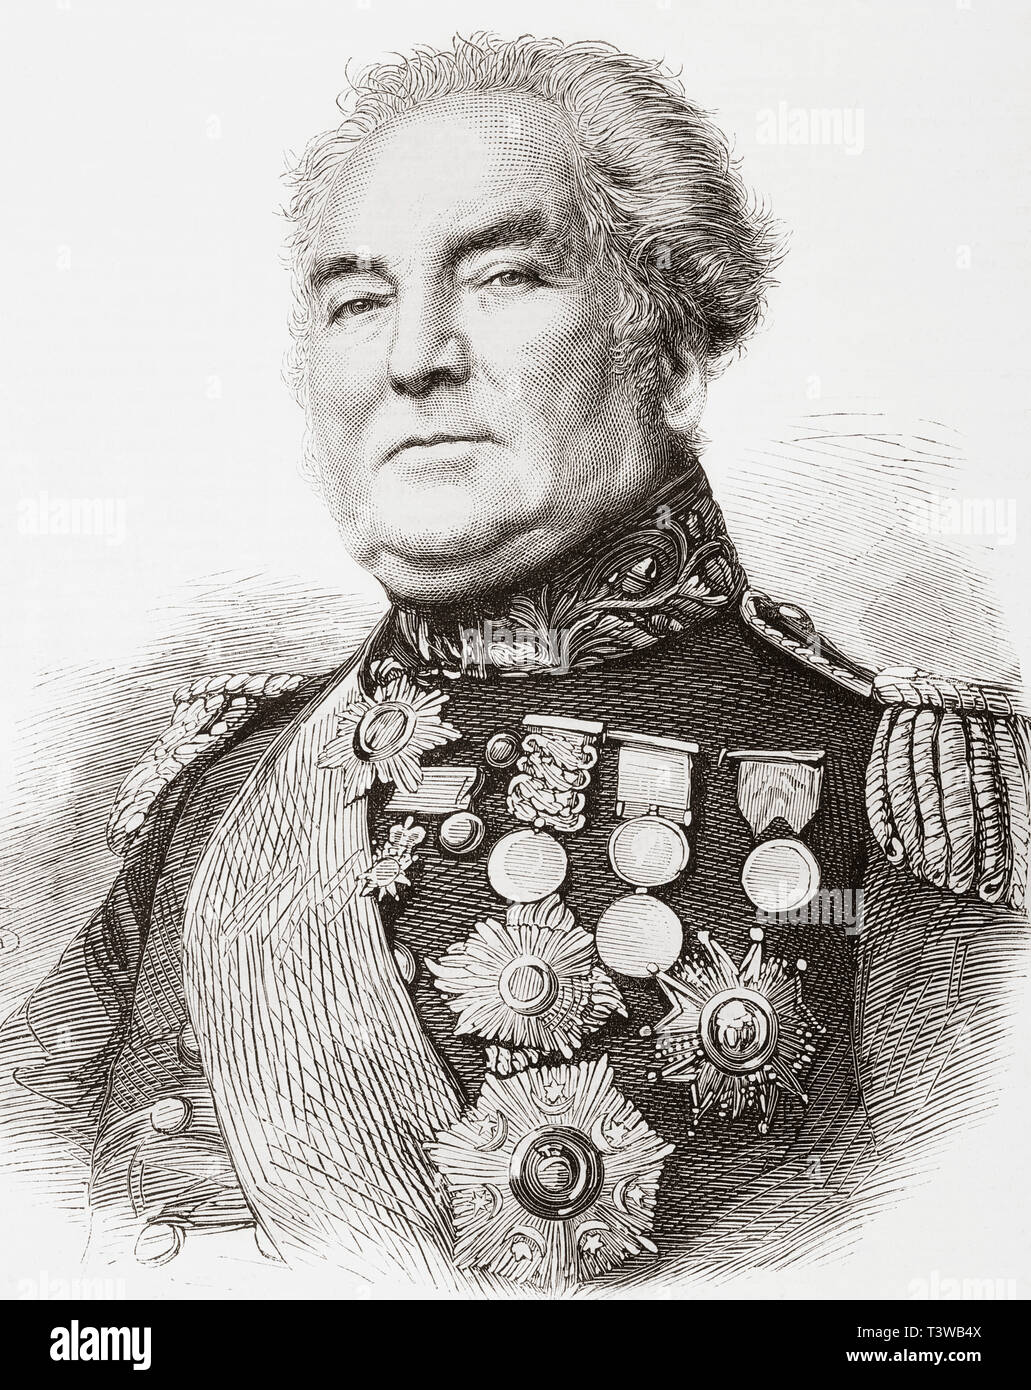 General Sir George Brown, 1790 - 1865.  British army officer.  From The Illustrated London News, published 1865. Stock Photo